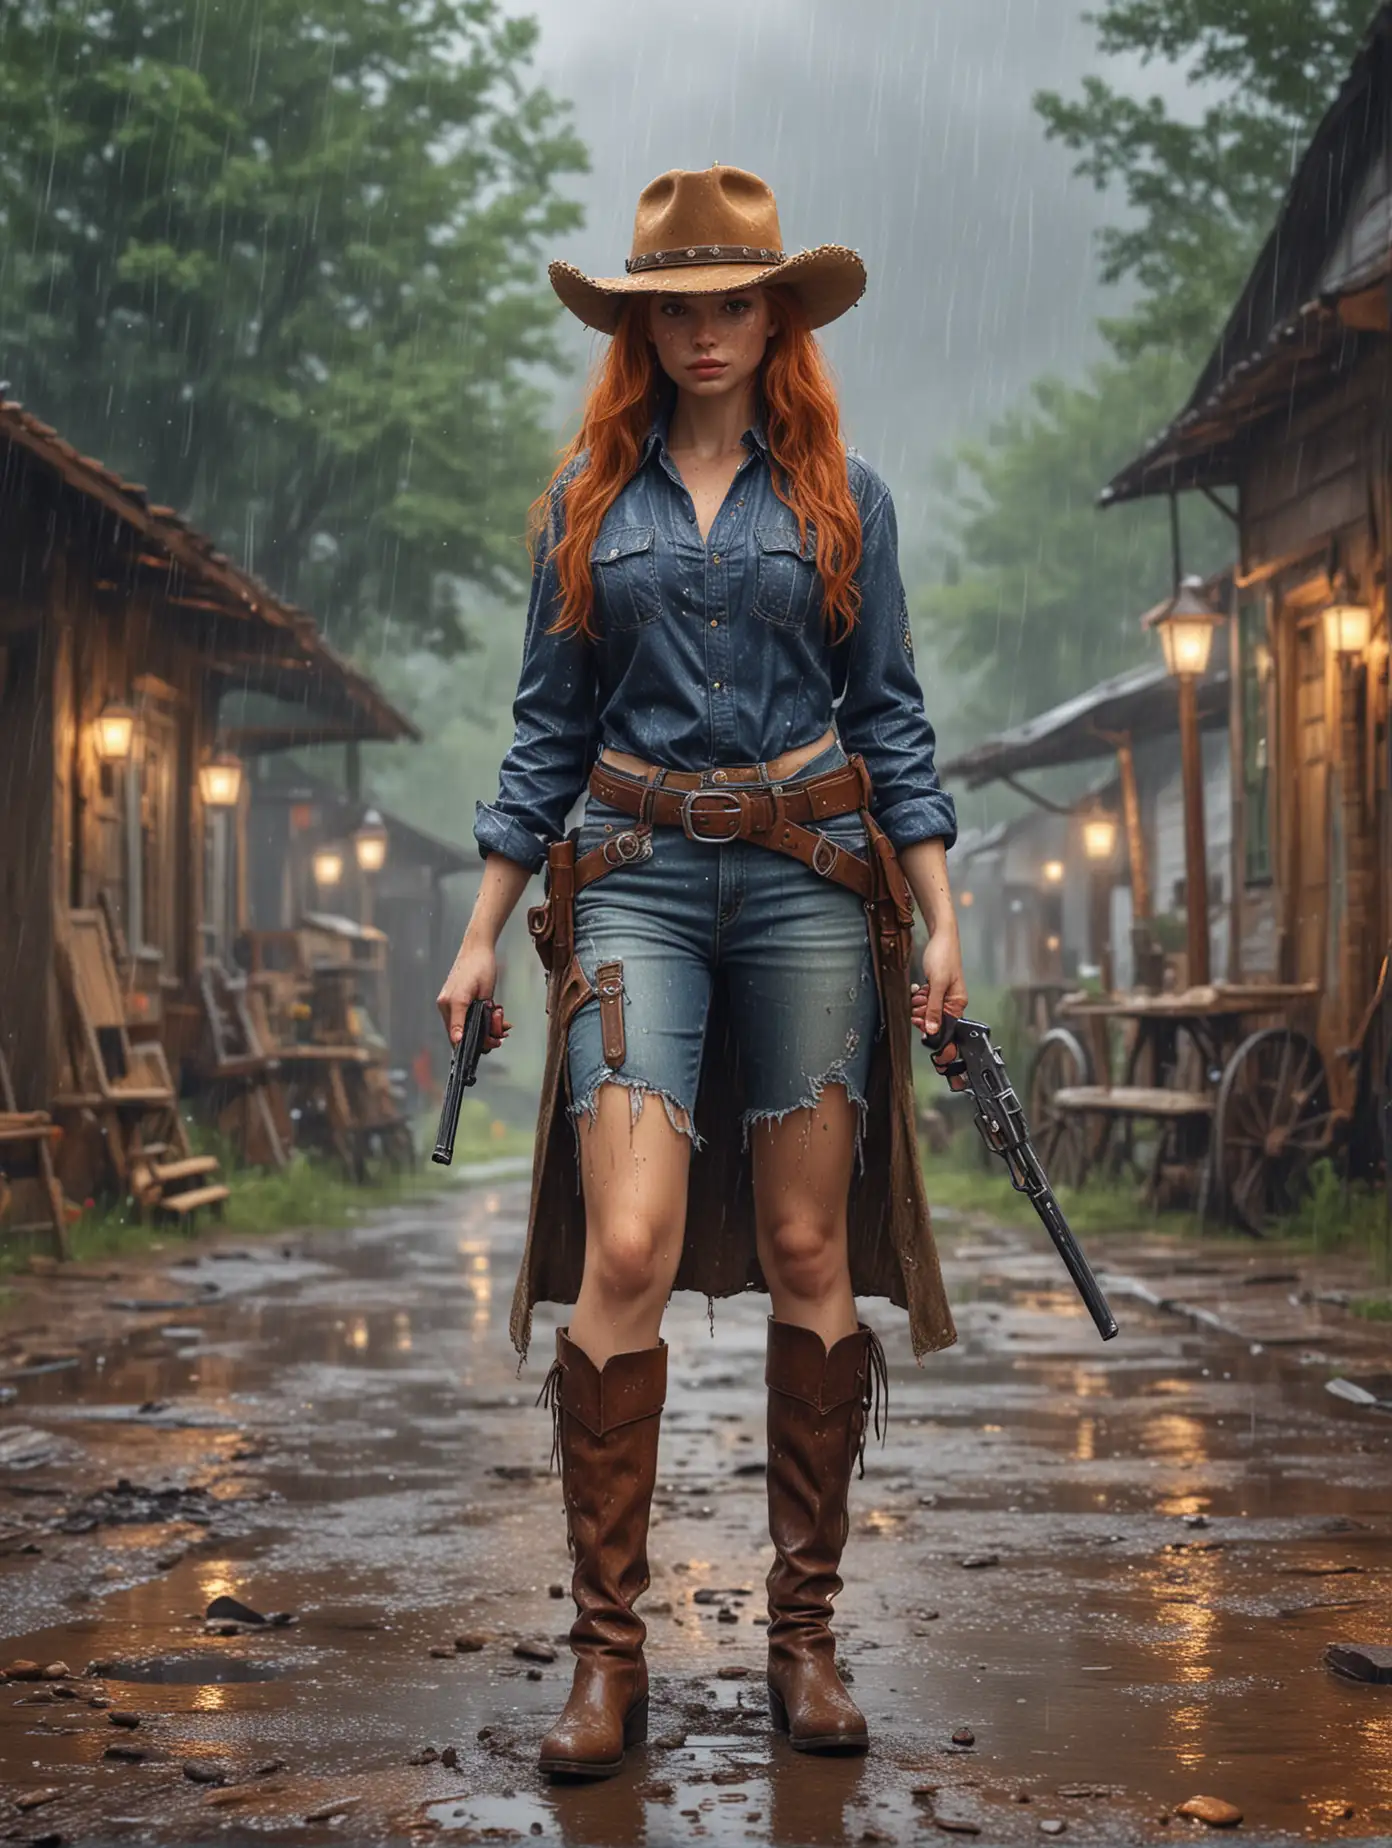 Create a realistic image of a beautiful ginger girl in a cowboy's outfit and holding colt gun, walking on dirty road in the pouring rain, in front of vintage cowboy's cottage, Realistic image, rain effects, water effect, colorful organic shape, hyperdetailed, masterpiece art